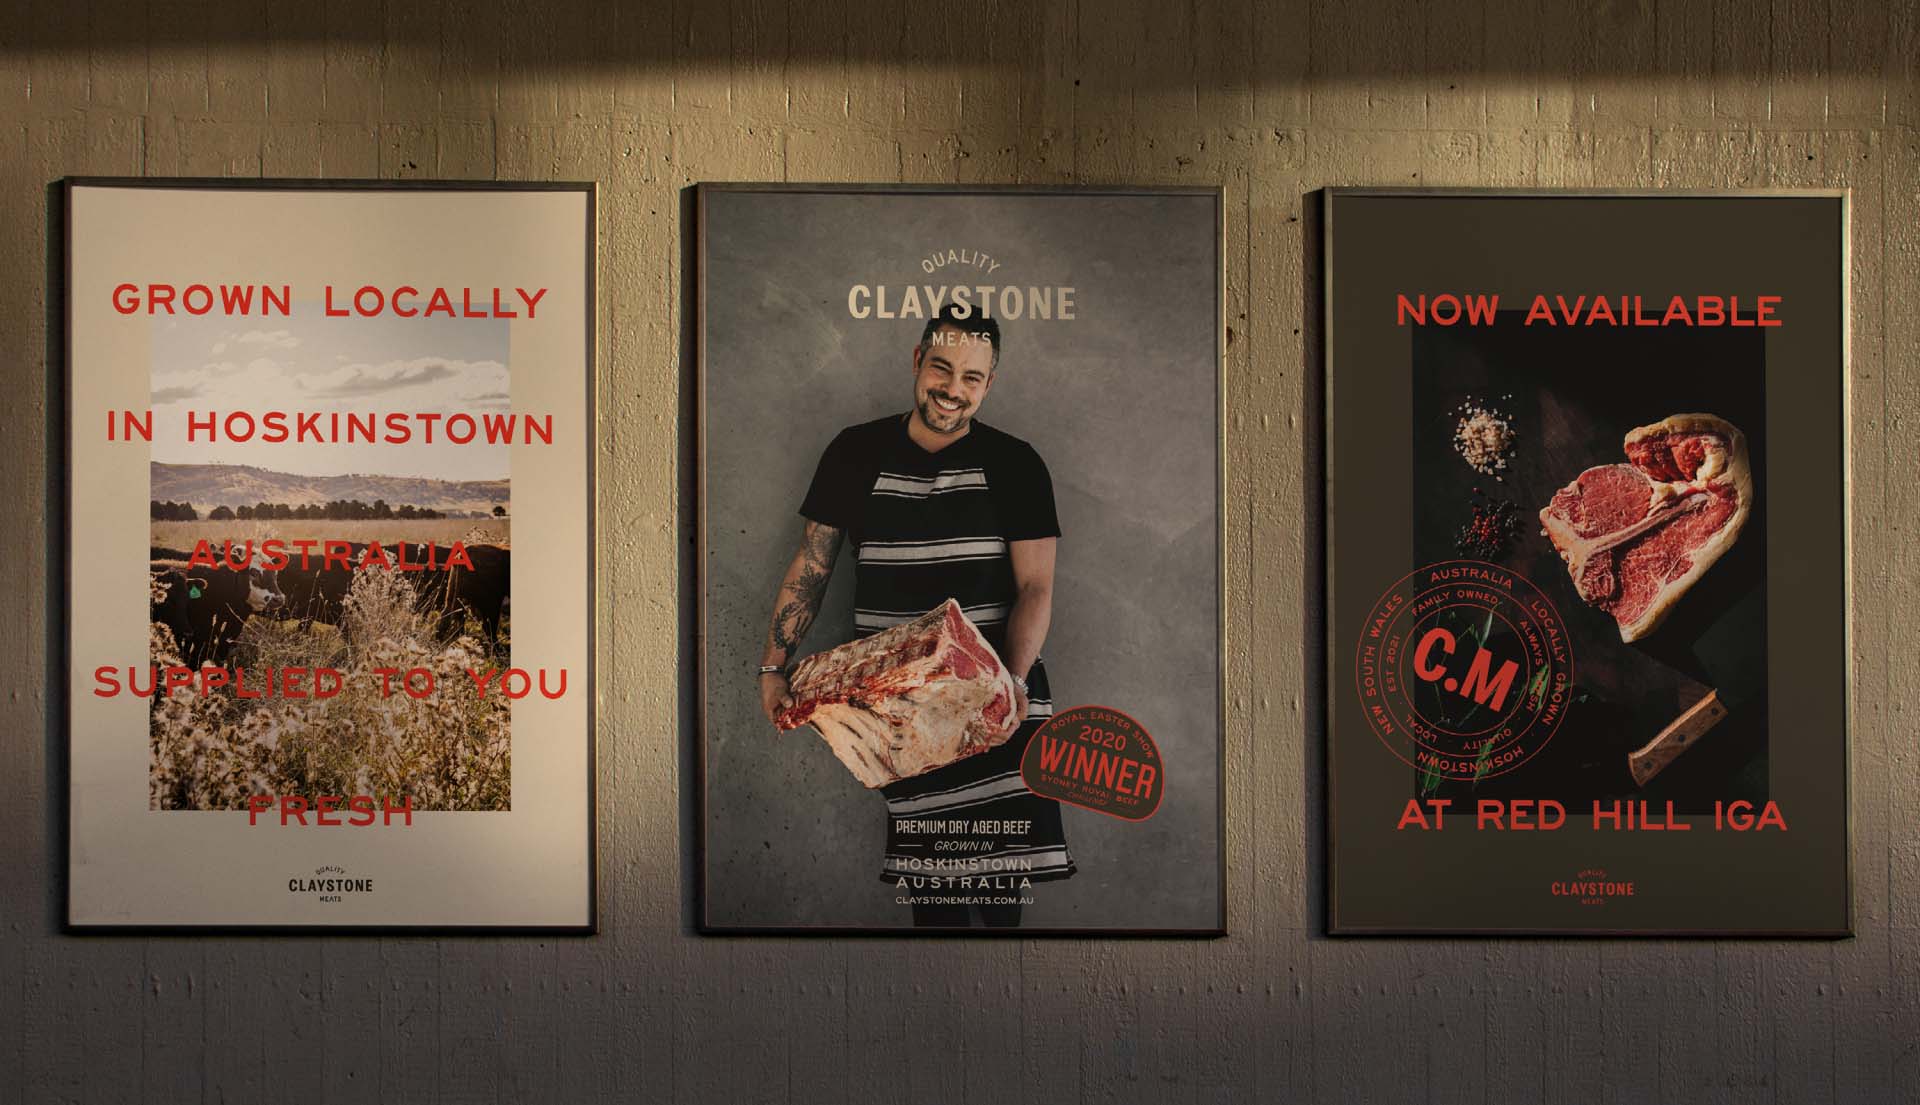 3 posters side by side with Claystone marketing.